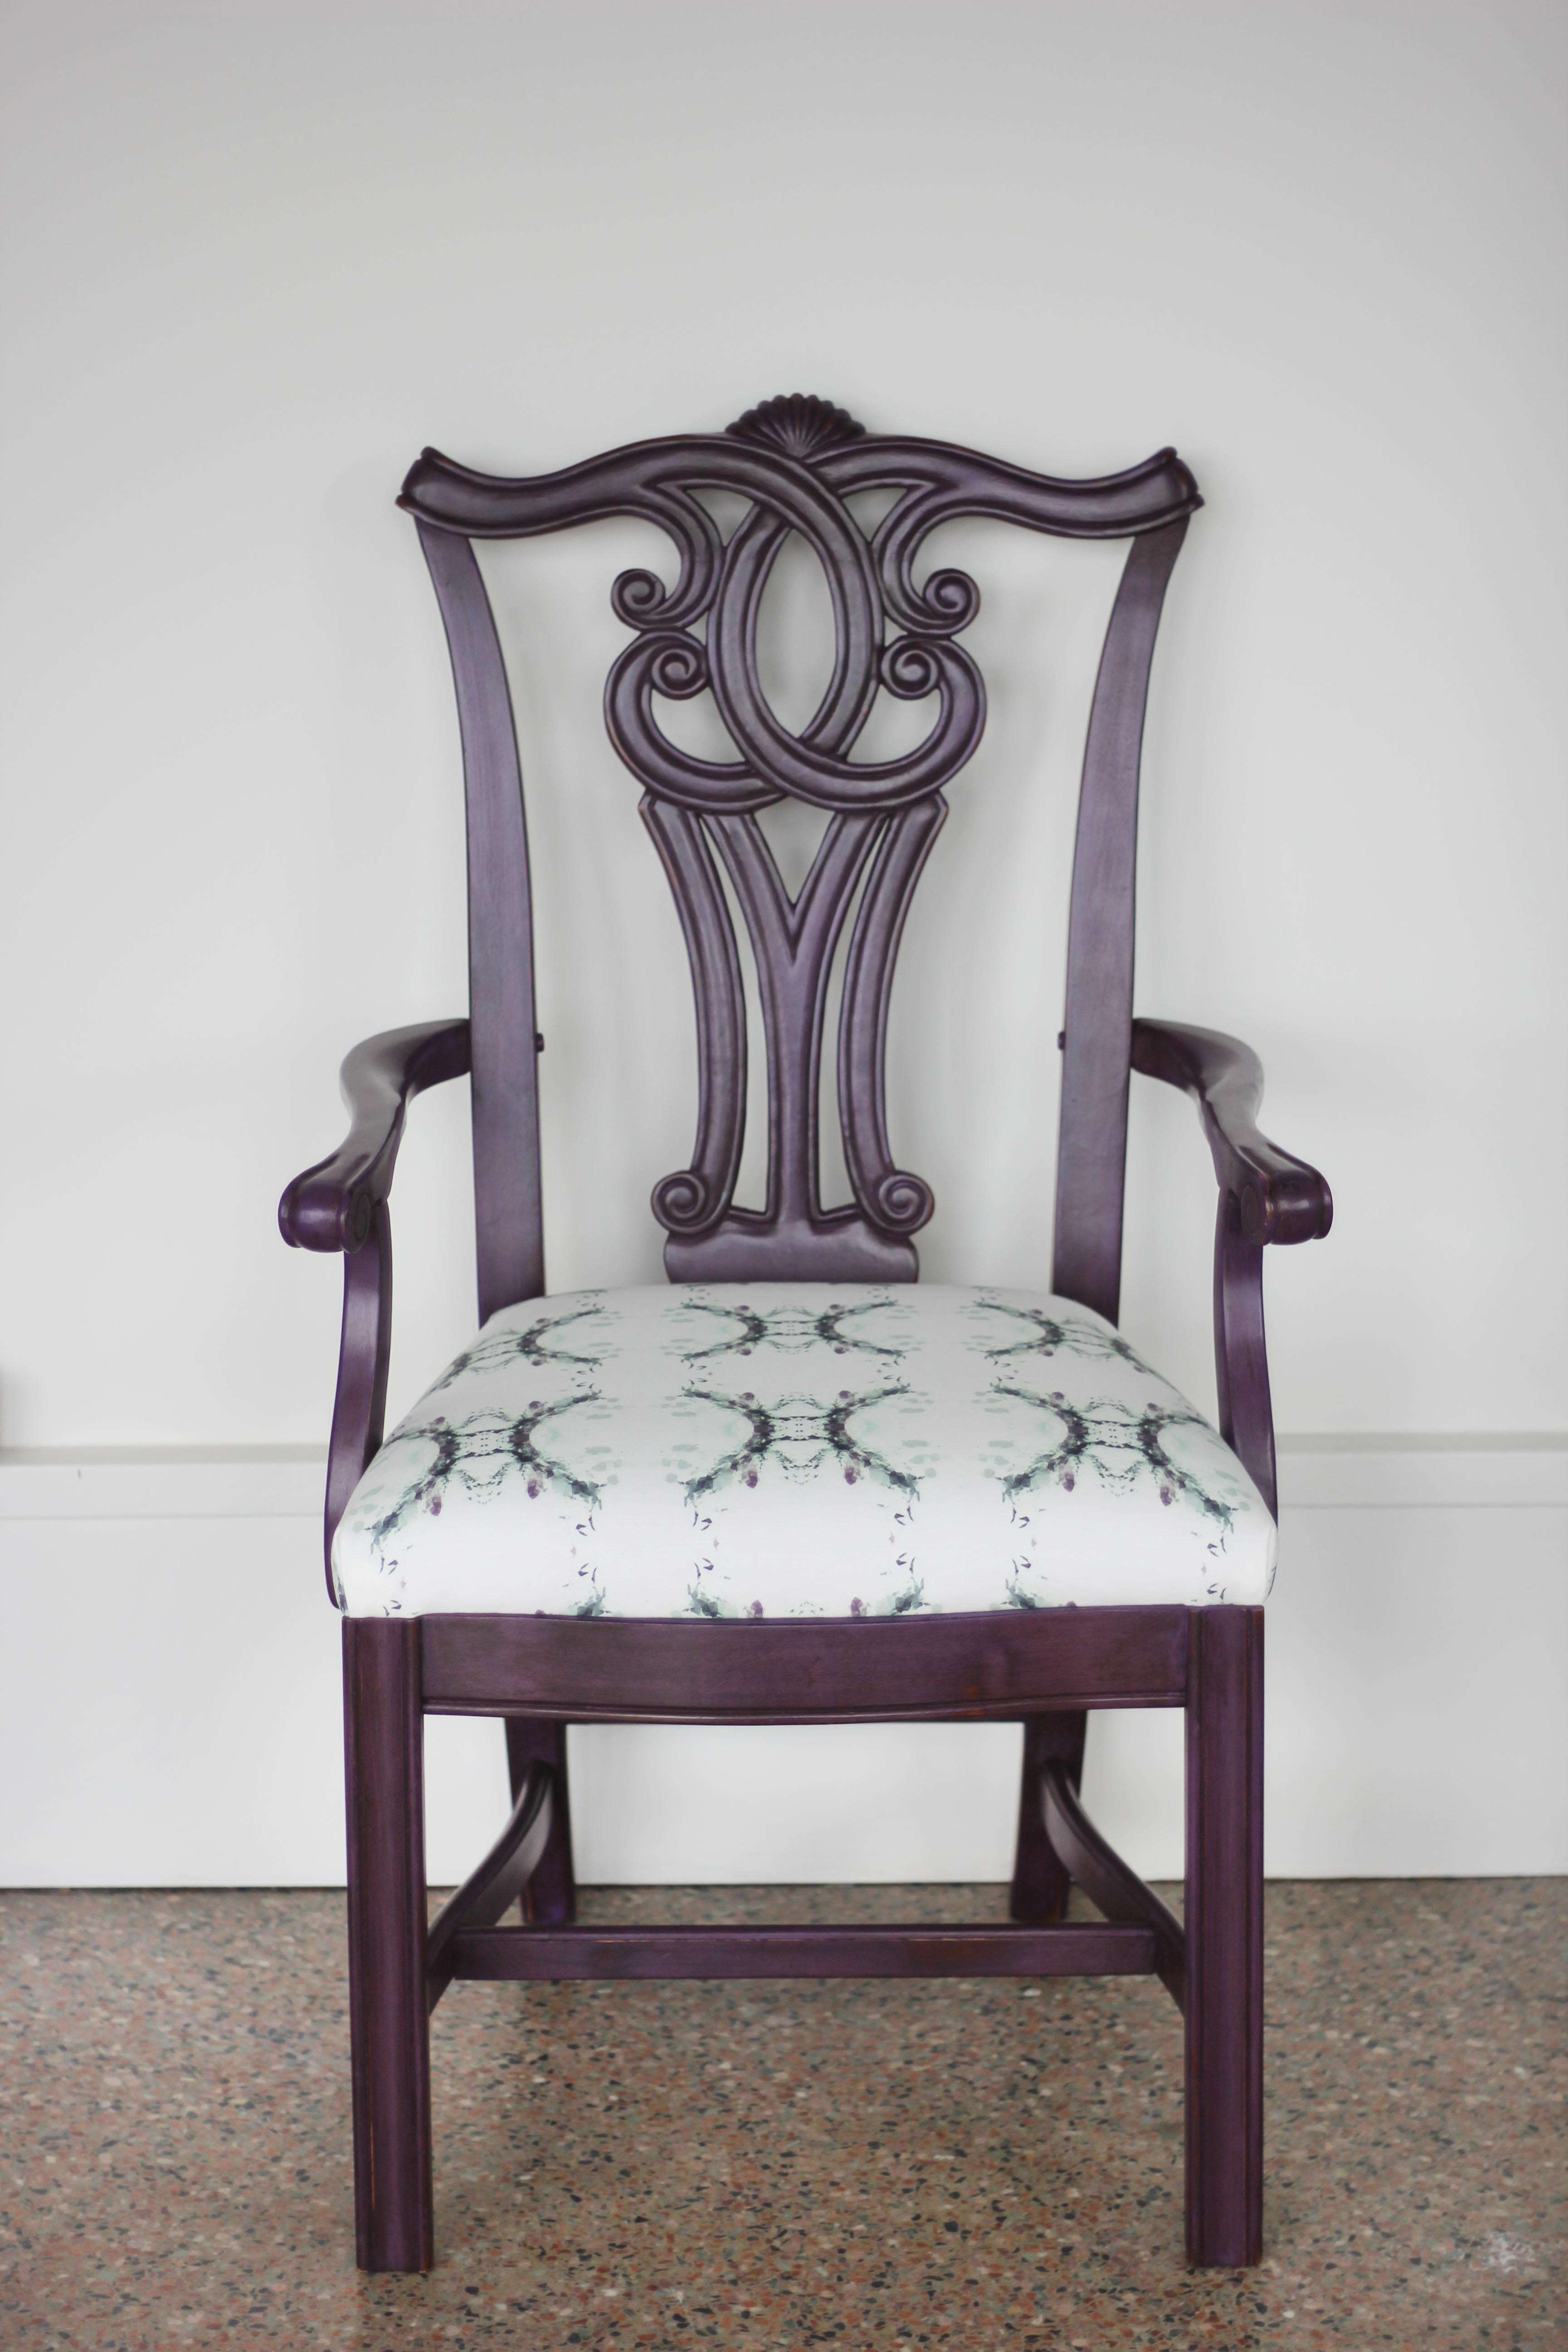 The full reveal of this darling Dharma chair